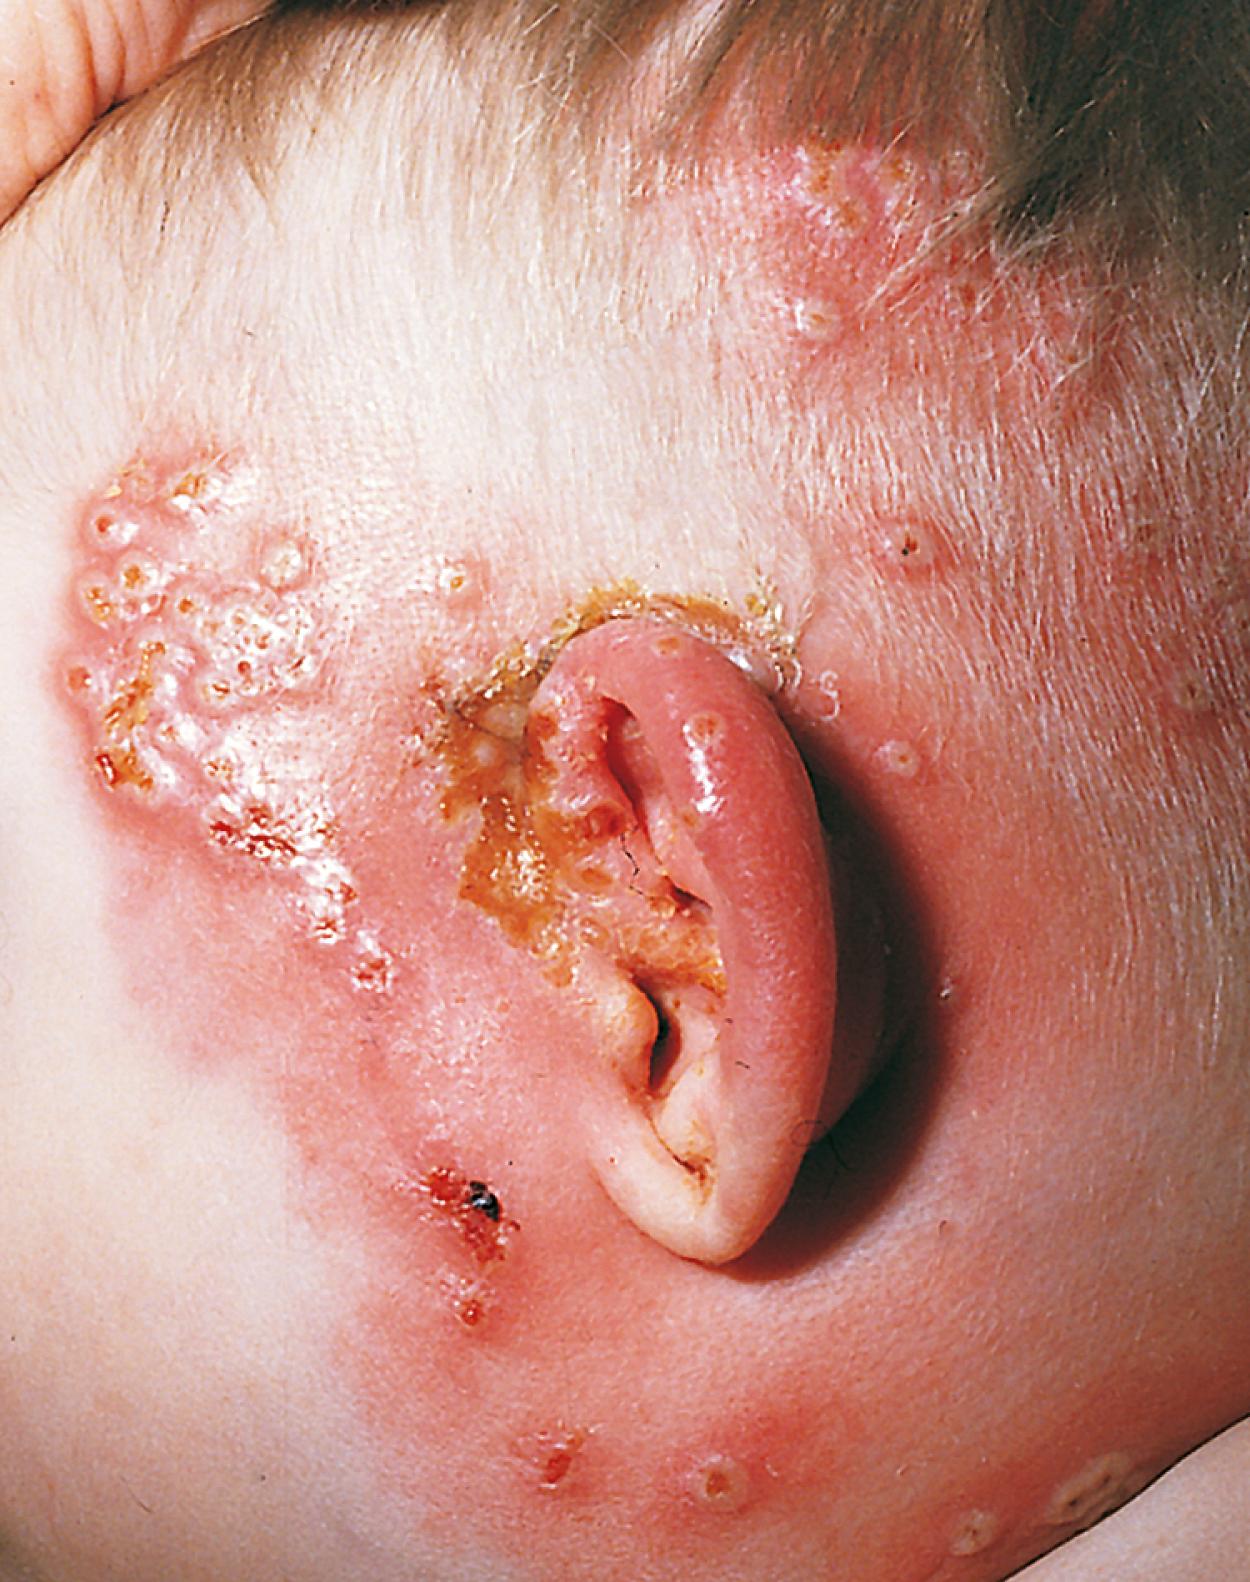 Fig. 24.12, Periauricular and auricular cellulitis. This infant had mild postauricular seborrhea and developed varicella. The vesicular varicella lesions that clustered at sites of prior skin irritation became secondarily infected with group A β-streptococci, resulting in cellulitis with intense erythema, edema, and tenderness of the auricle and periauricular tissues. In this case, the external canal was normal.